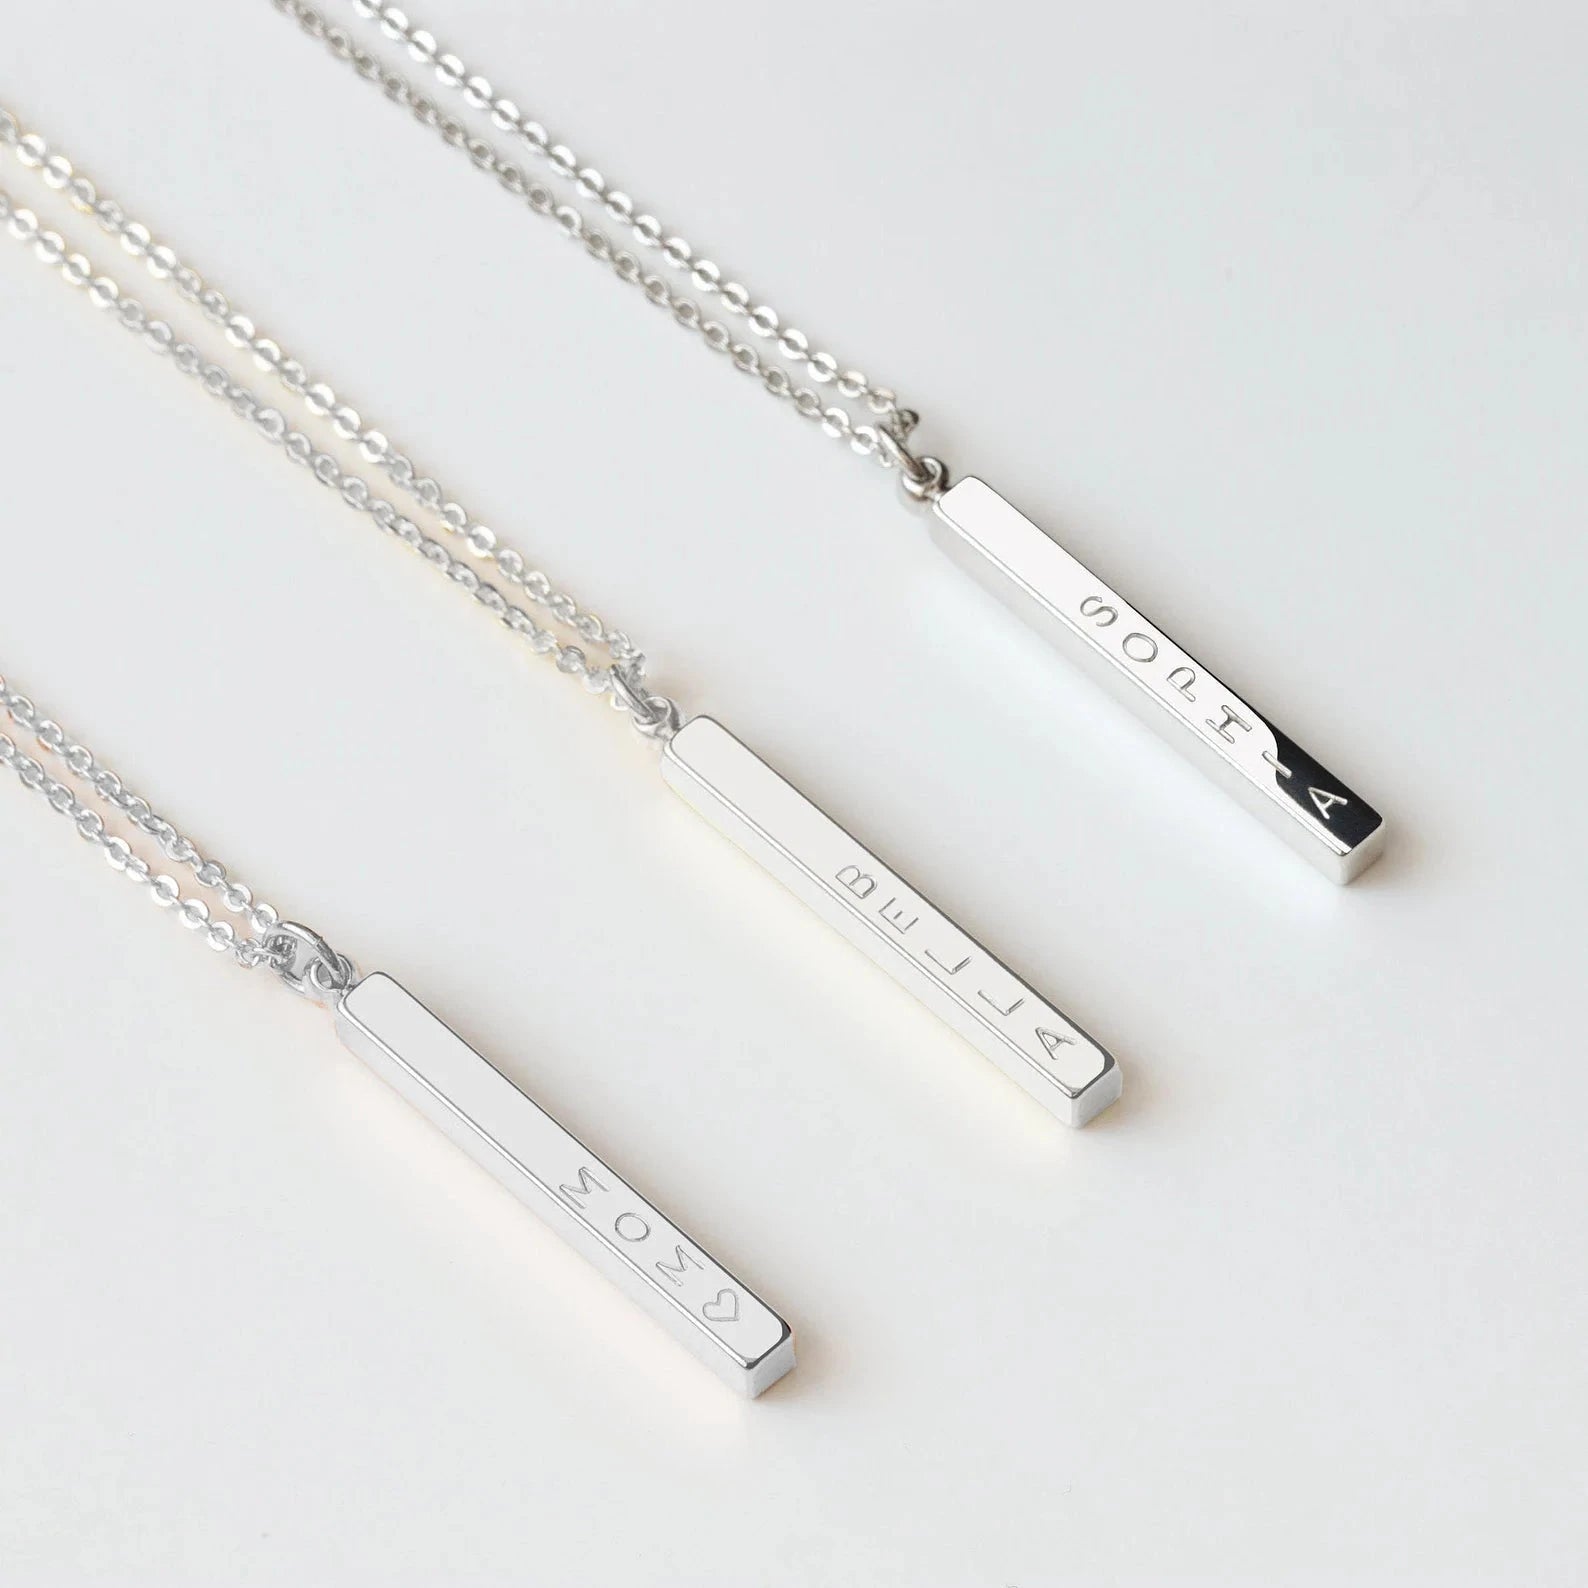 Personalized Necklaces - Groovy Girl Gifts